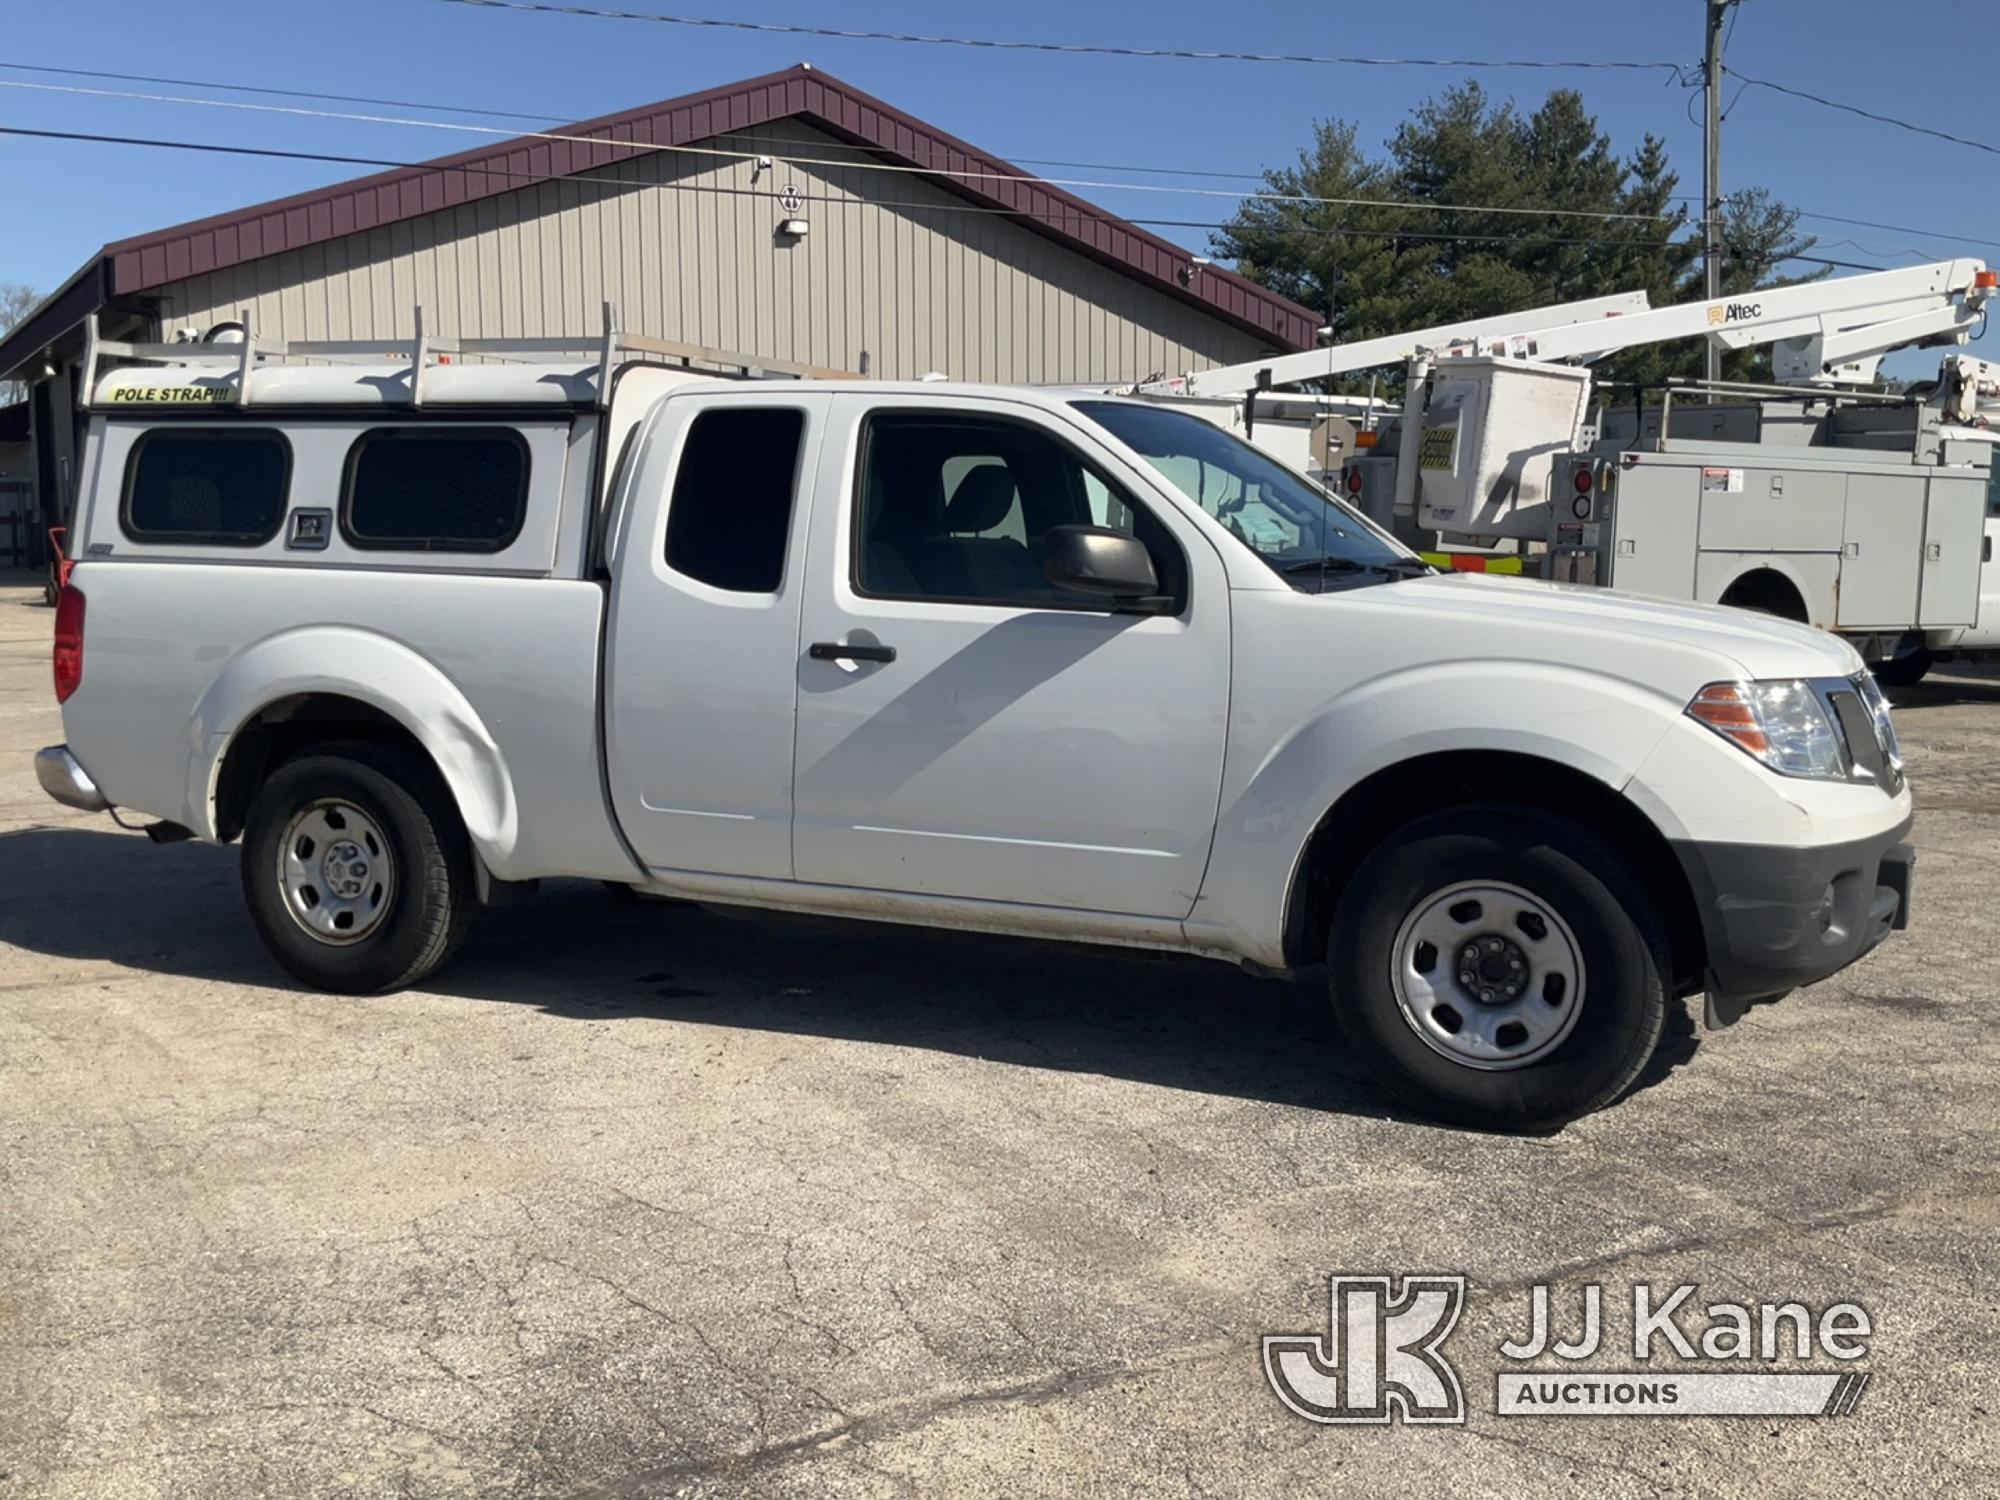 (South Beloit, IL) 2015 Nissan Frontier Extended-Cab Pickup Truck Runs & Moves) (Body Damage, Paint